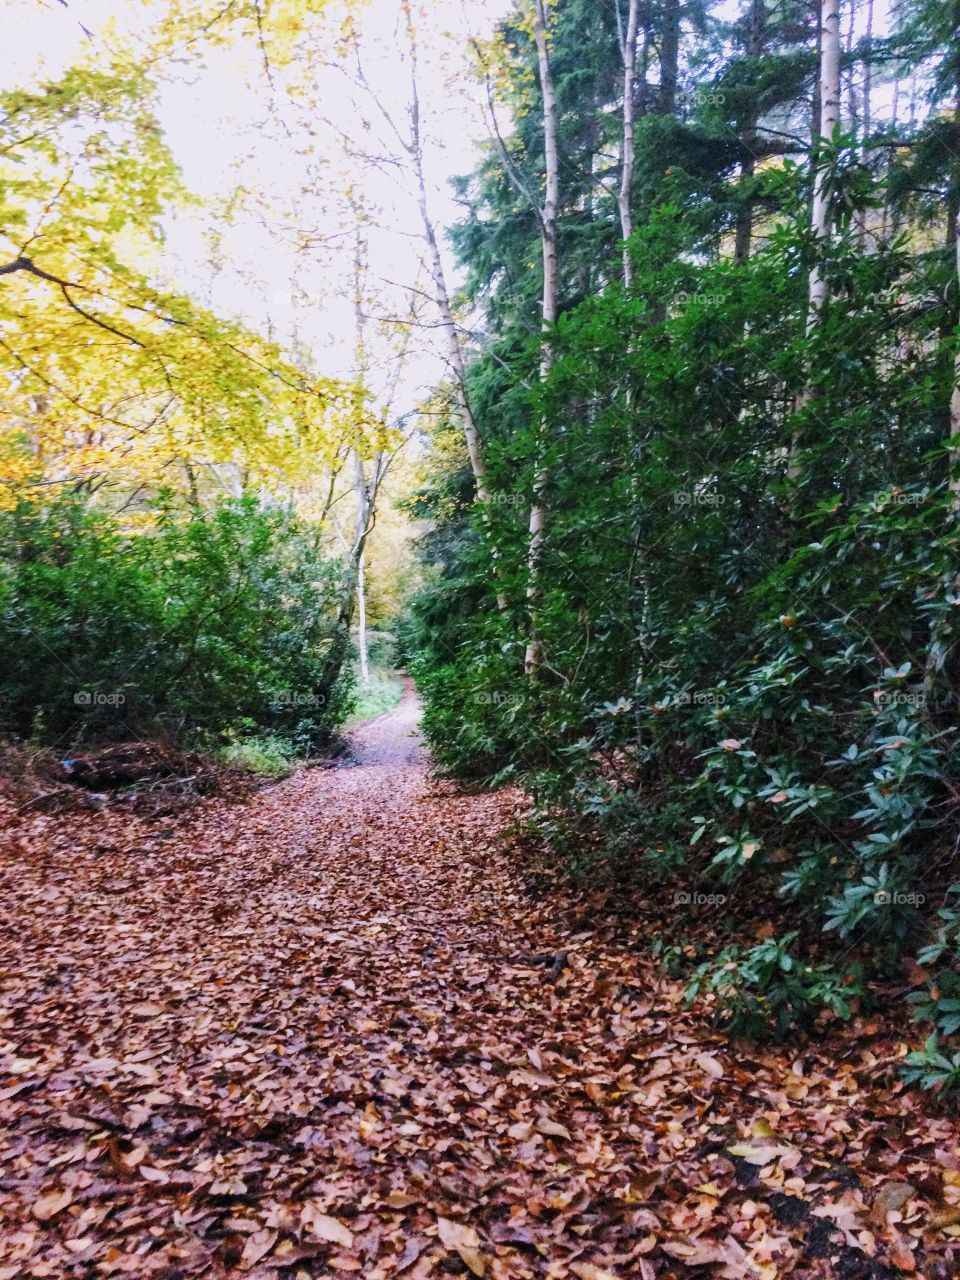 November leaves on the 'trim-trail' at Foxhills, Chertsey, Surrey, England